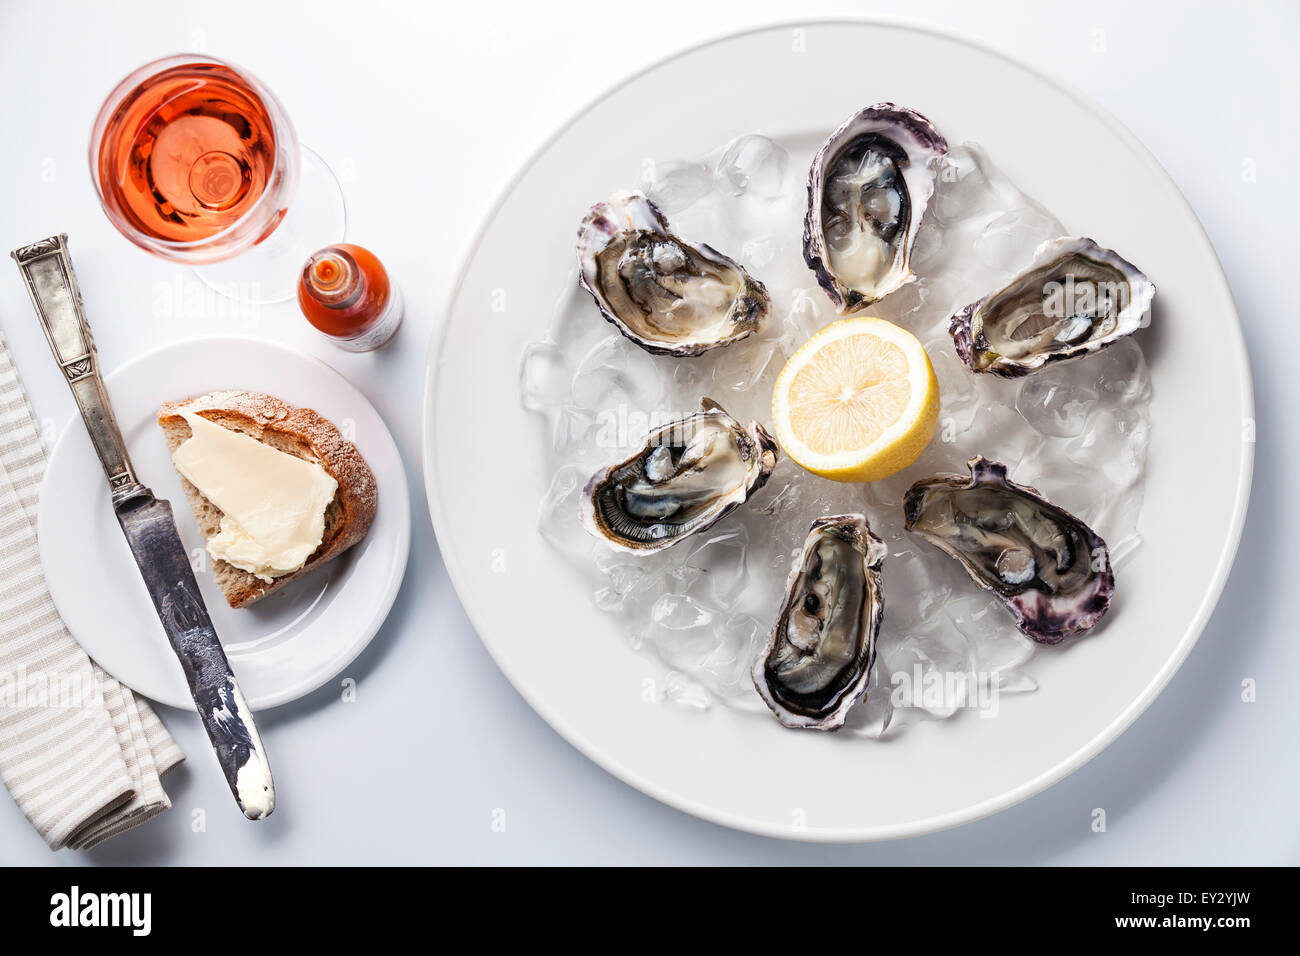 Opened Oysters on white plate, rose wine and dark bread with butter on white background Stock Photo